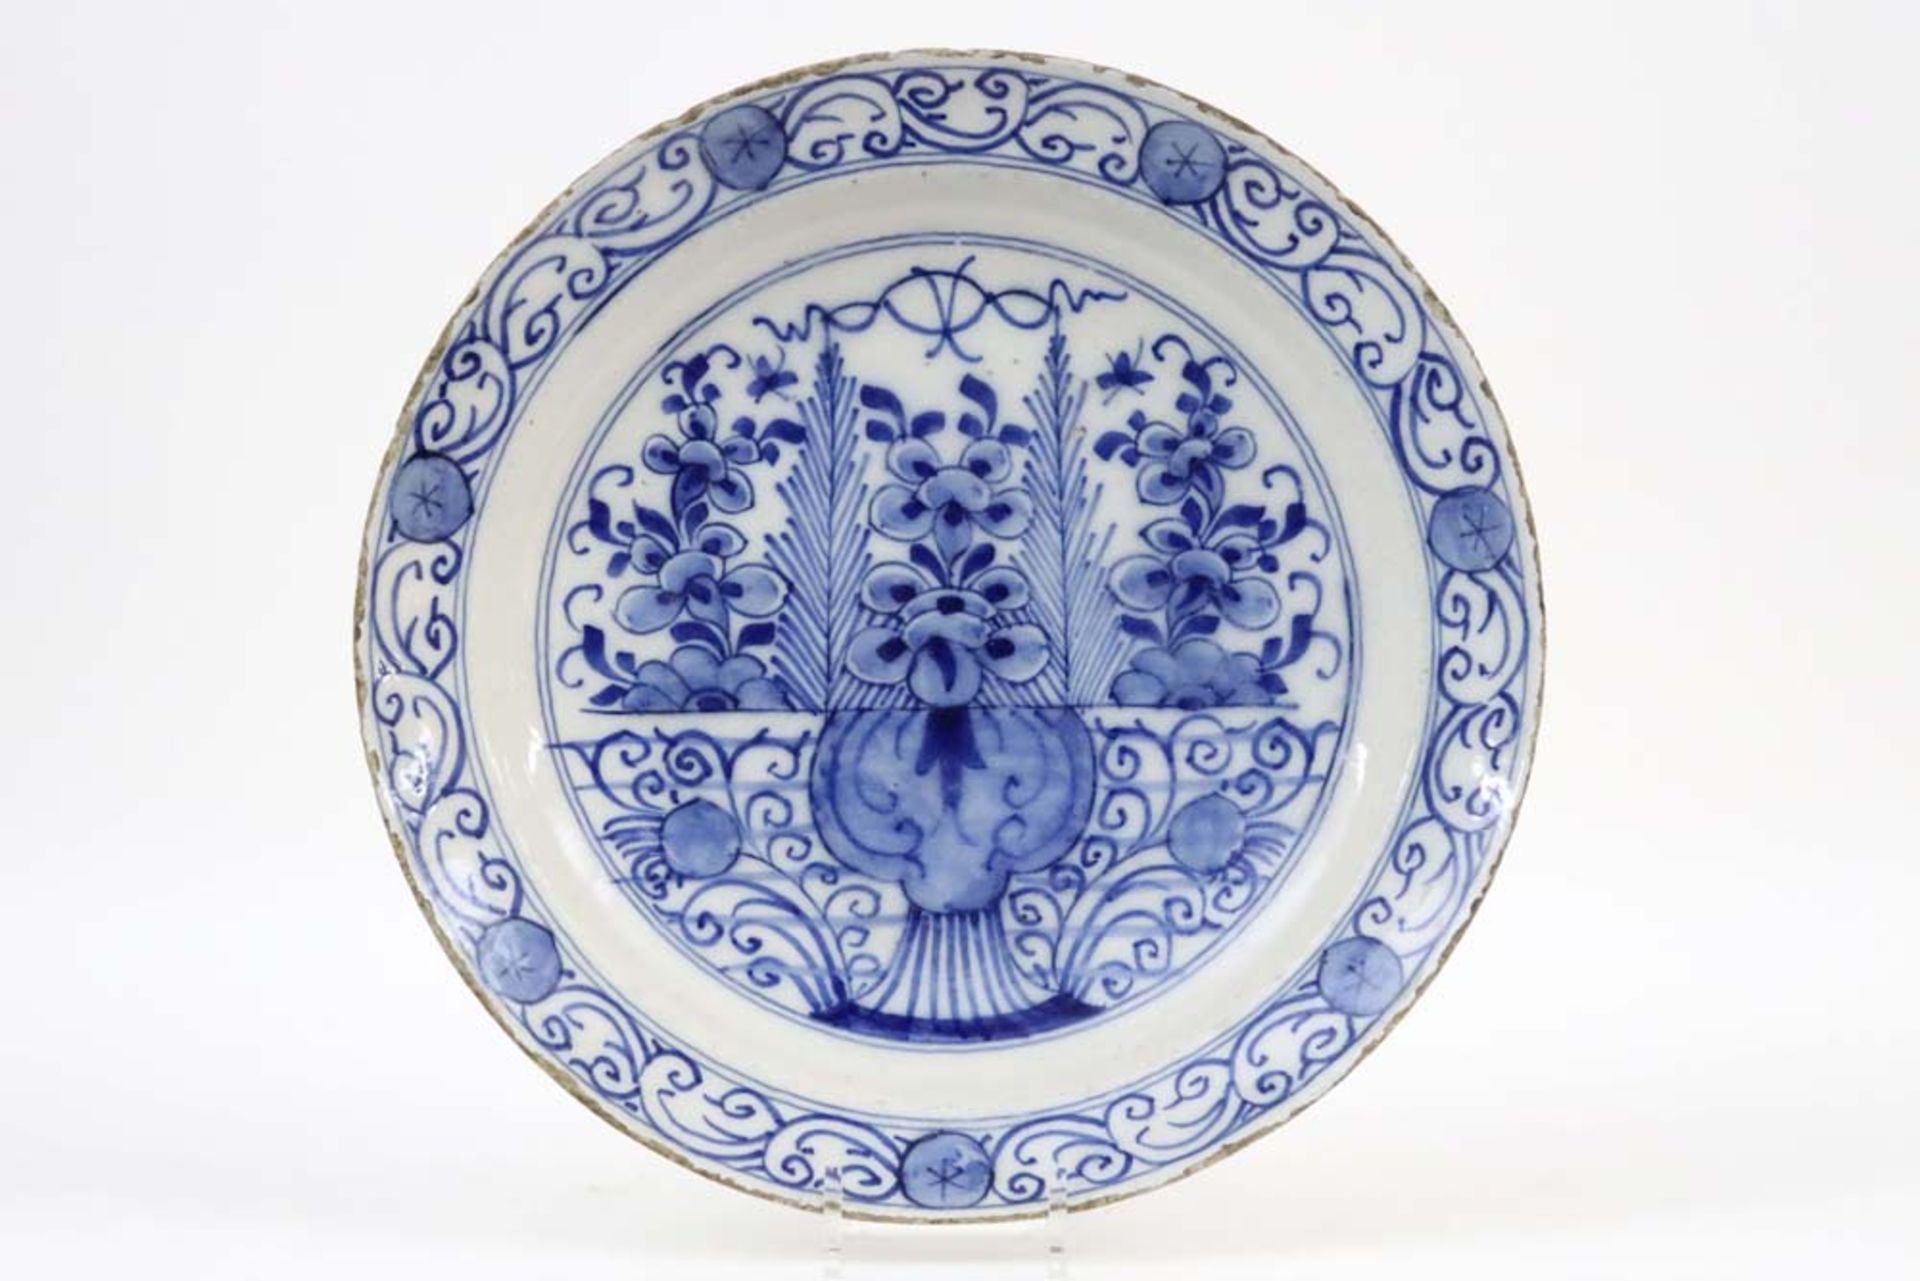 18th Cent. dish in ceramic (marked "25") with a blue-white decor || Achttiende eeuwse schaal in